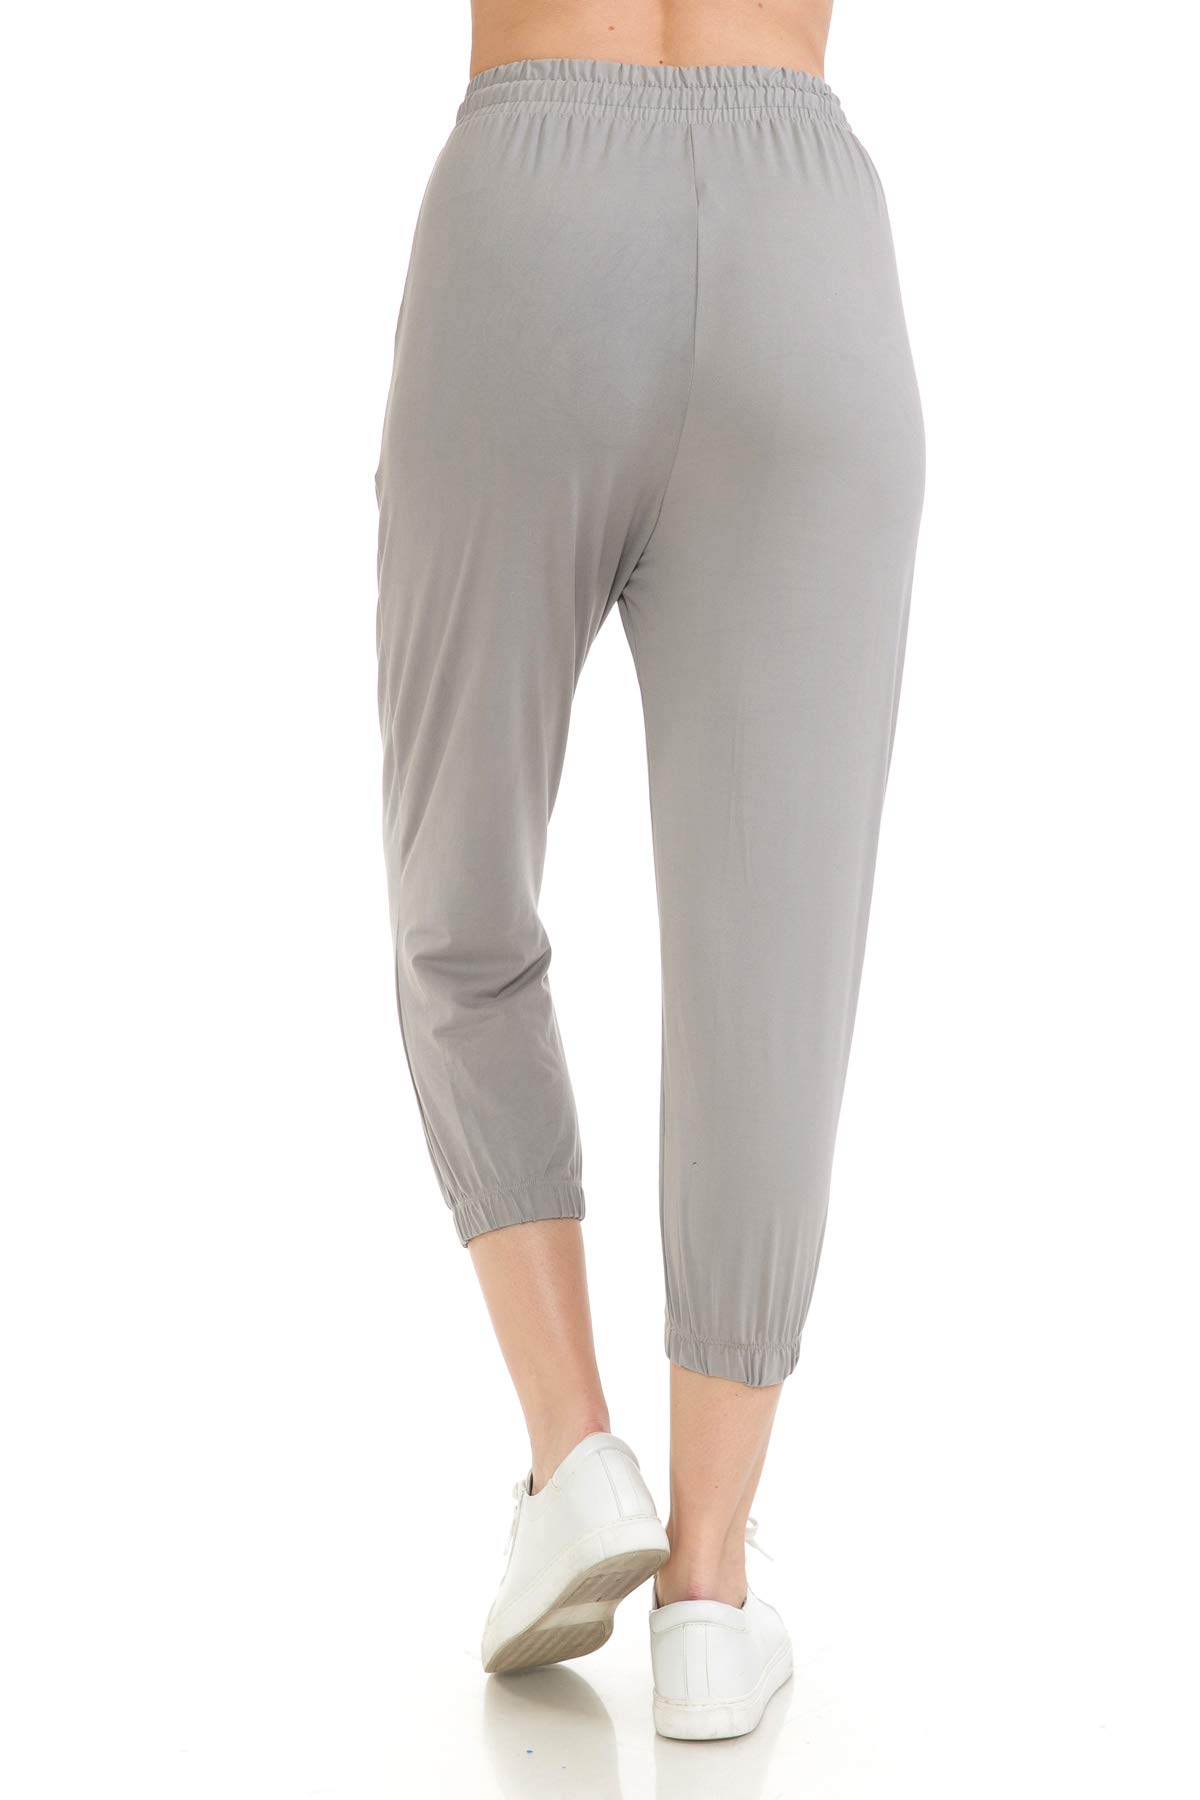 Buy Leggings Depot Women's Relaxed-fit Jogger Track Cuff